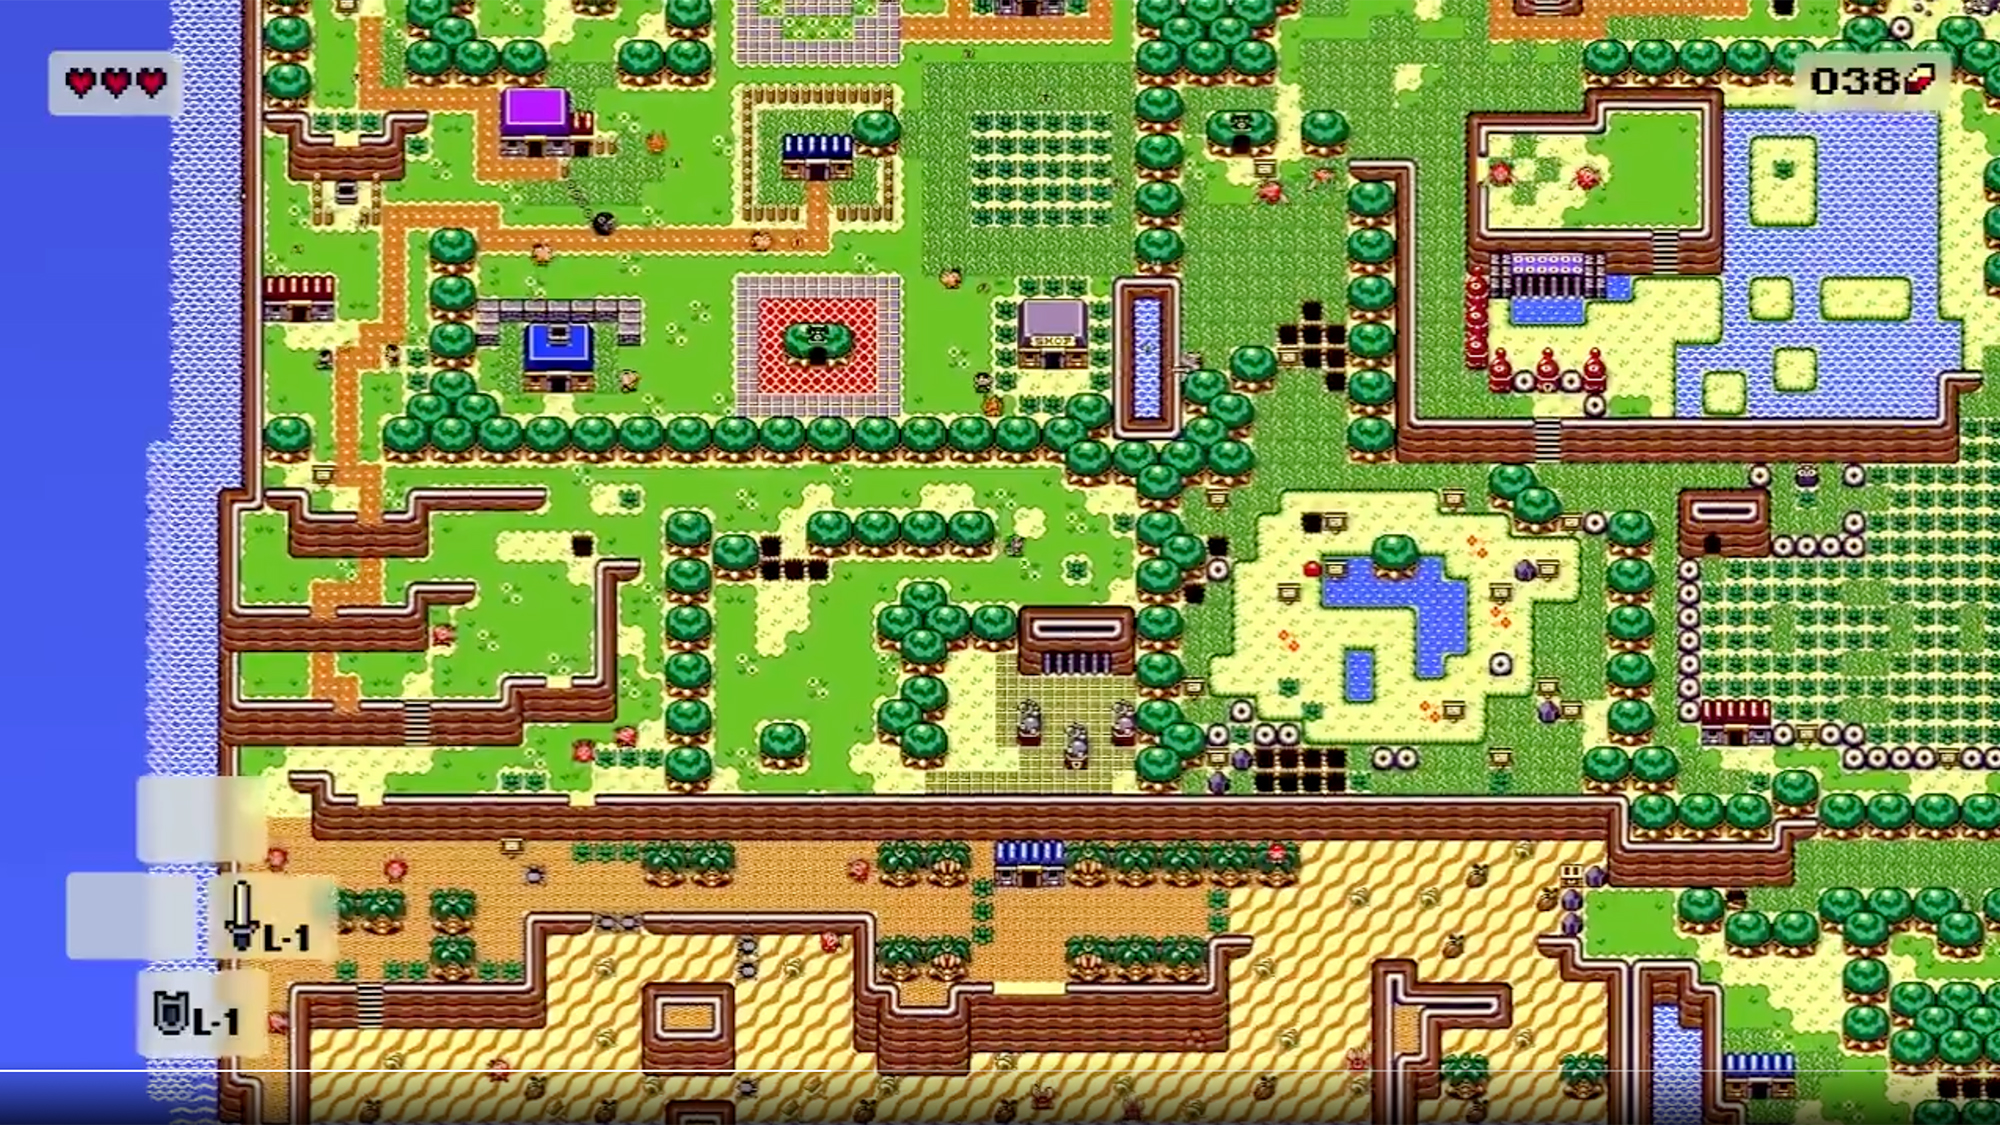 Fan-made remake of The Legend of Zelda: Link's Awakening, showing most of the southwest portion of Koholint Island as Link walks around. Colorful 1990 Game Boy graphics zoomed out far past what that hardware supported.